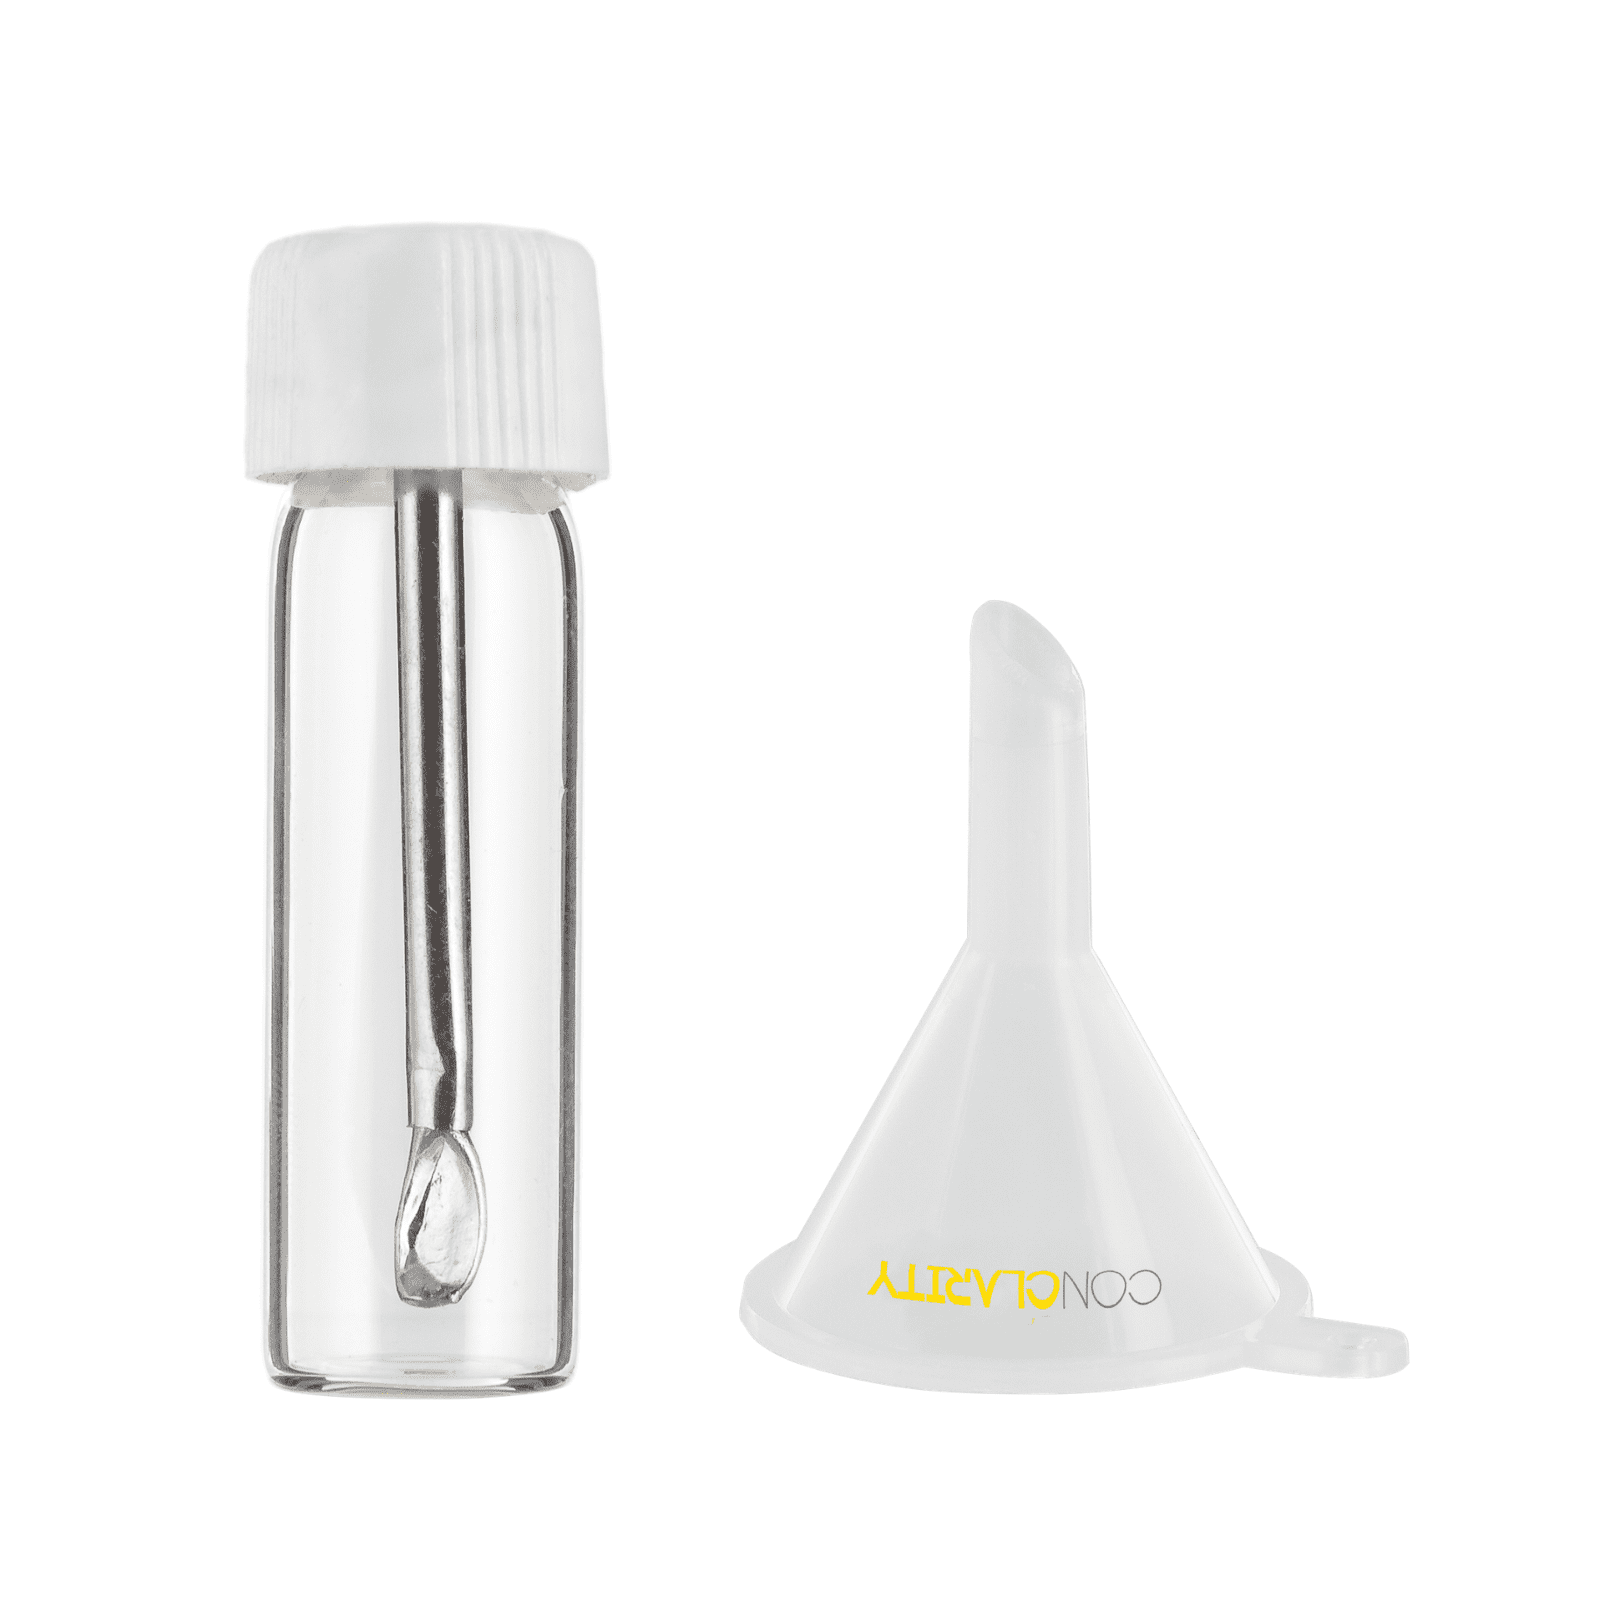 Glass and Acrylic with ConClarity Micro Funnel Premium 3g Tall Yellow Safety Spoon Snuff Bullet Spice Storage 